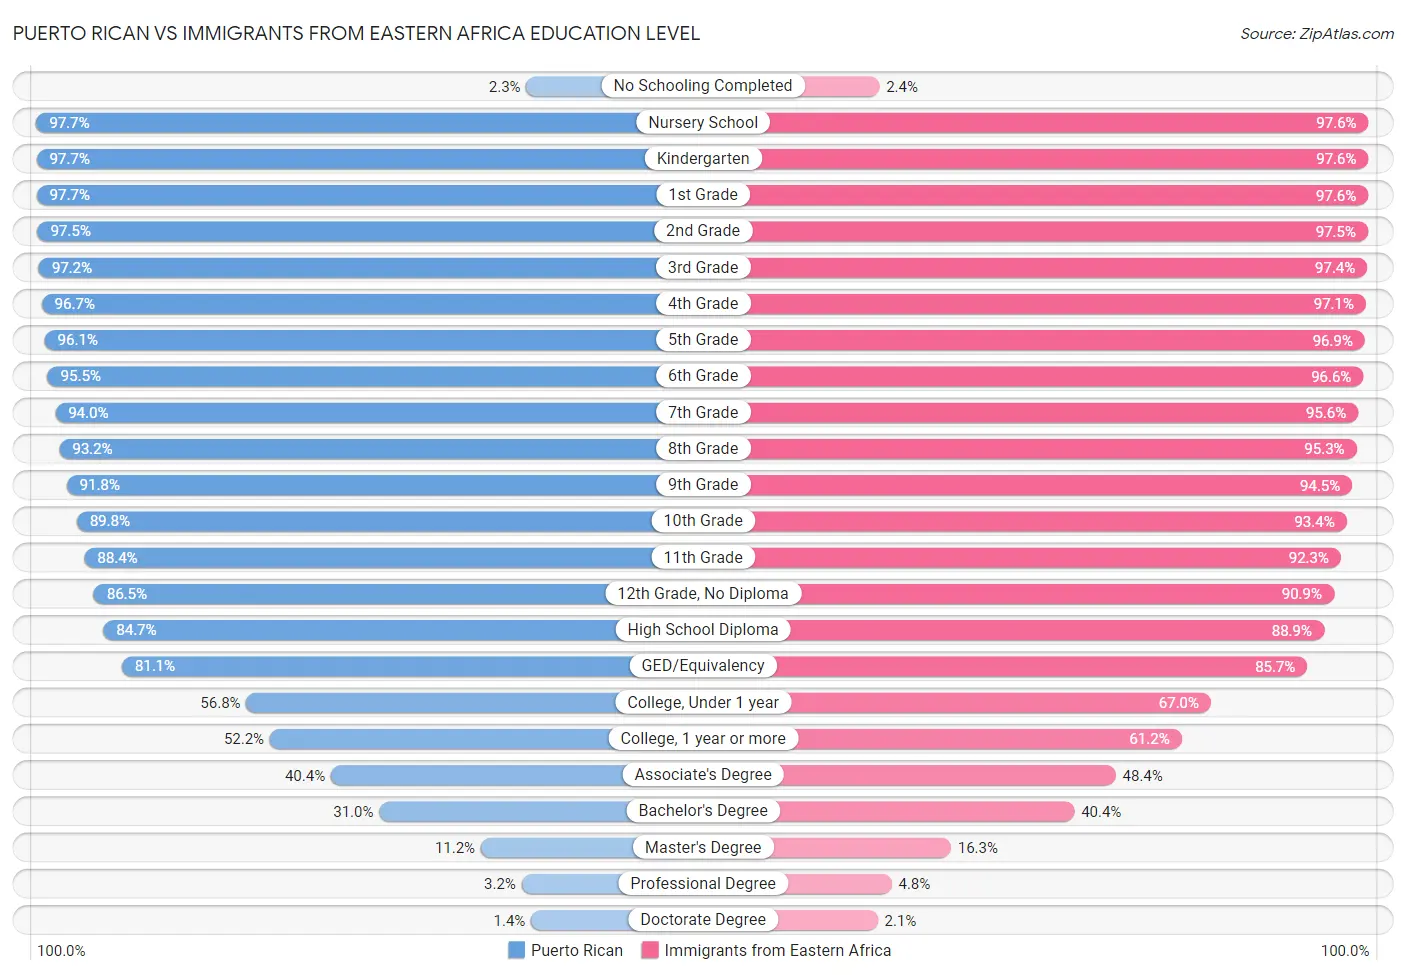 Puerto Rican vs Immigrants from Eastern Africa Education Level